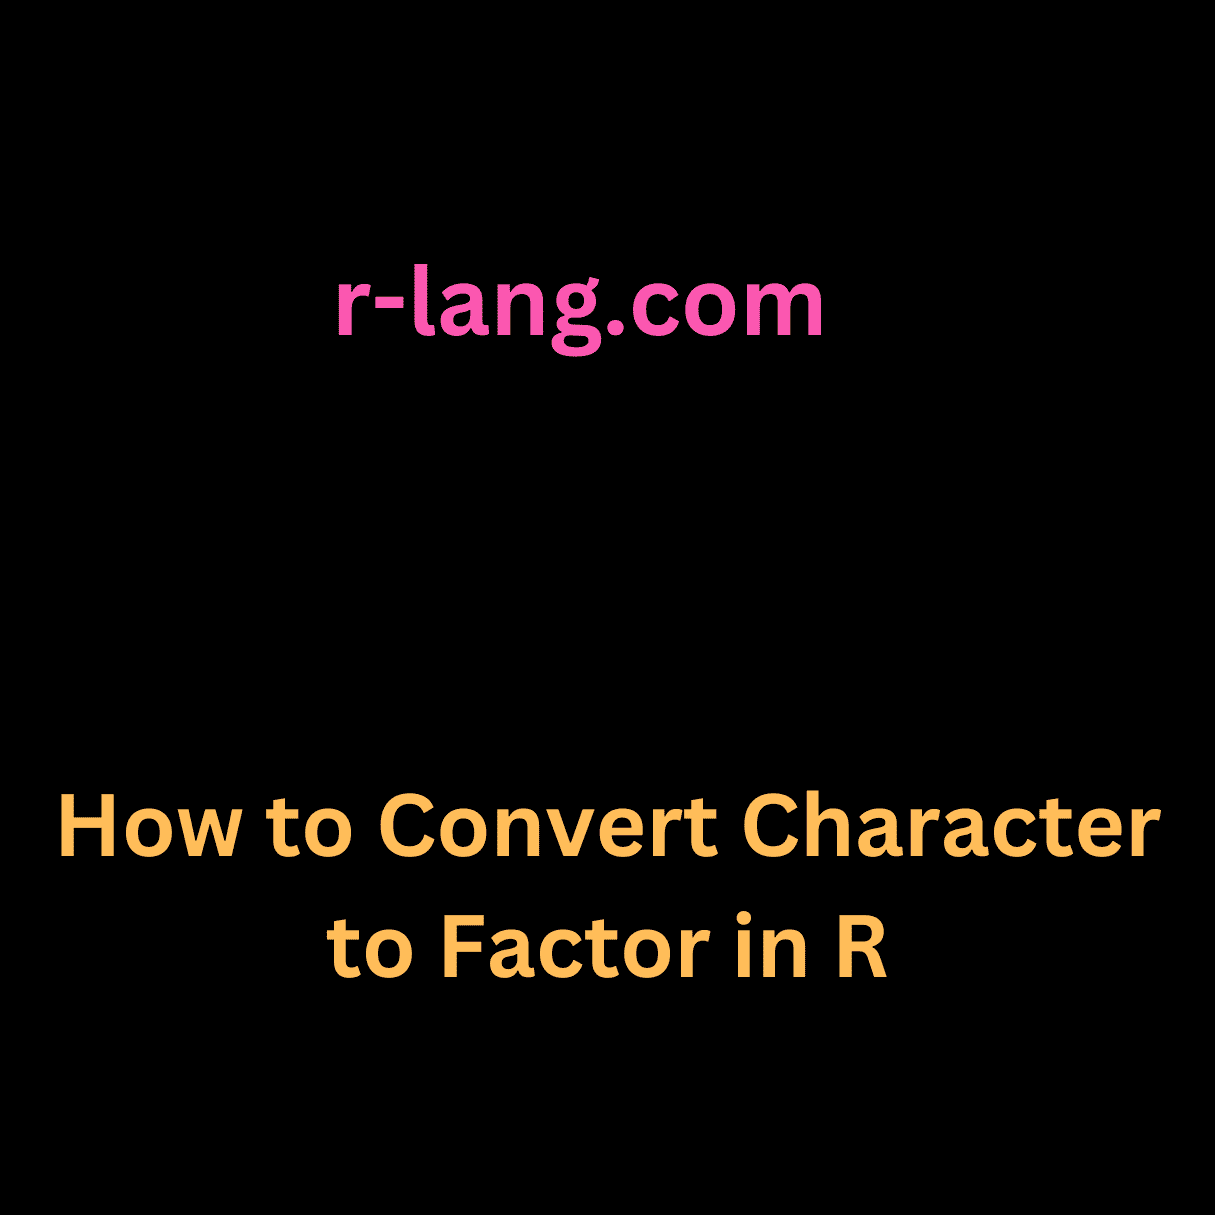 How to Convert Character to Factor in R